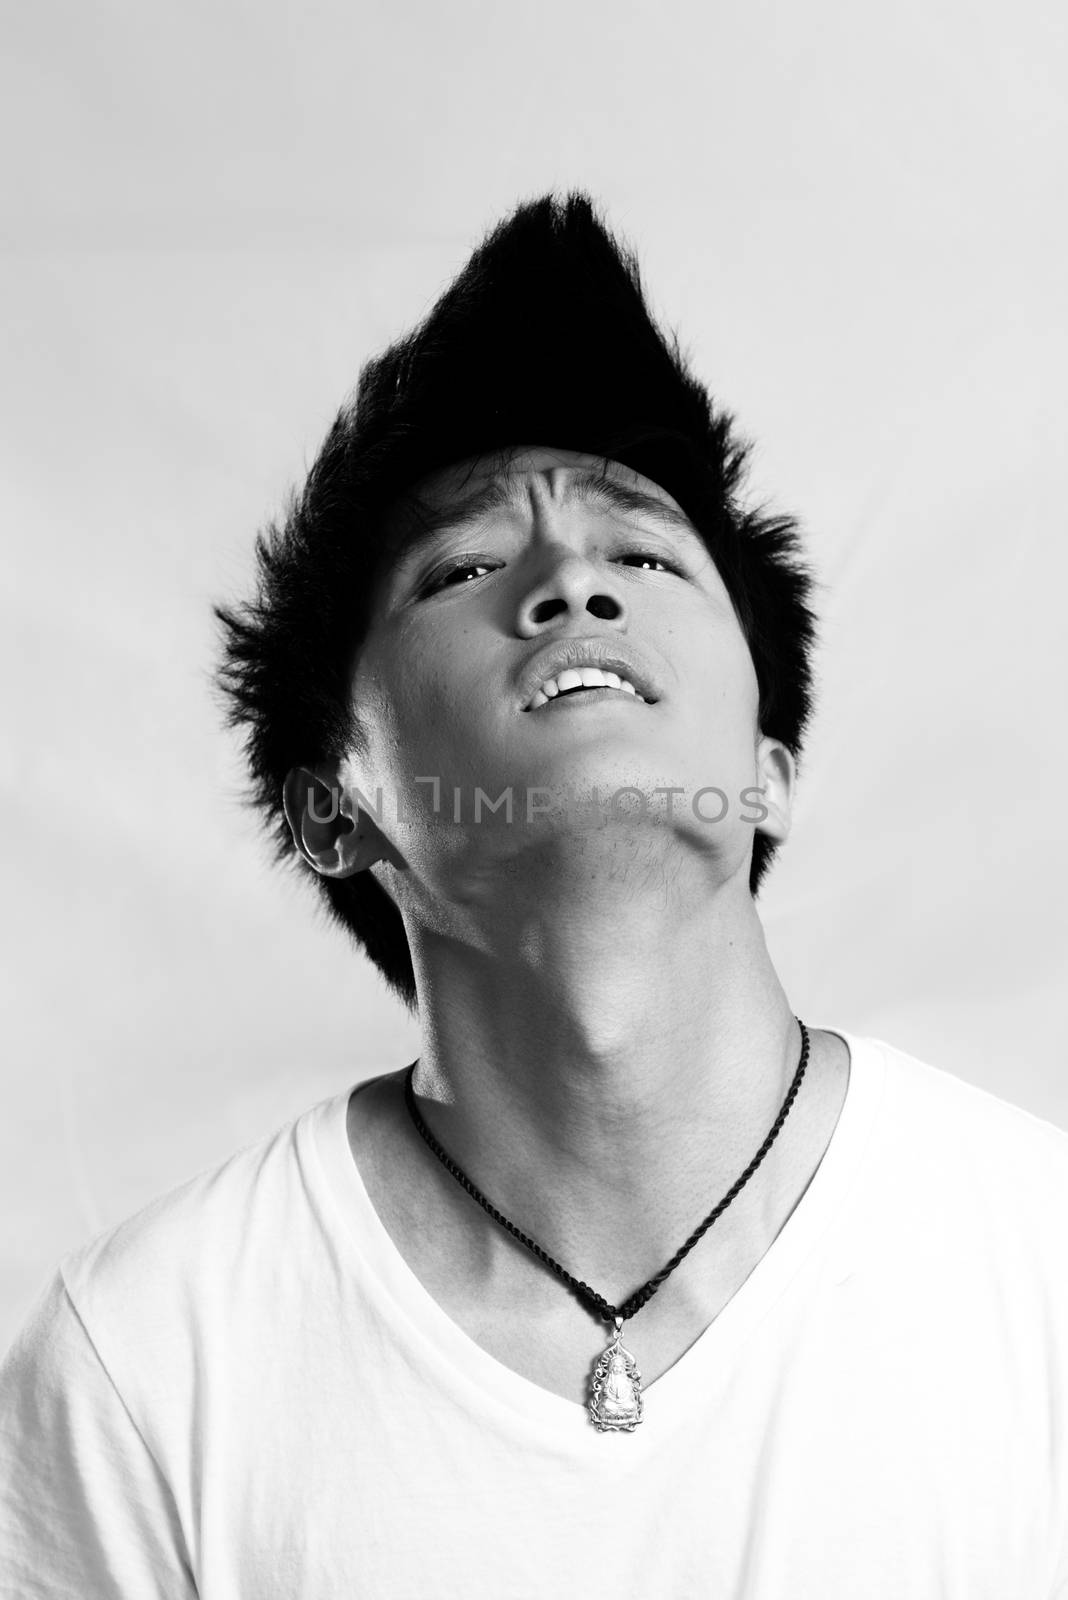 Portrait of handsome young man looking upset and flicking hair, black and white style